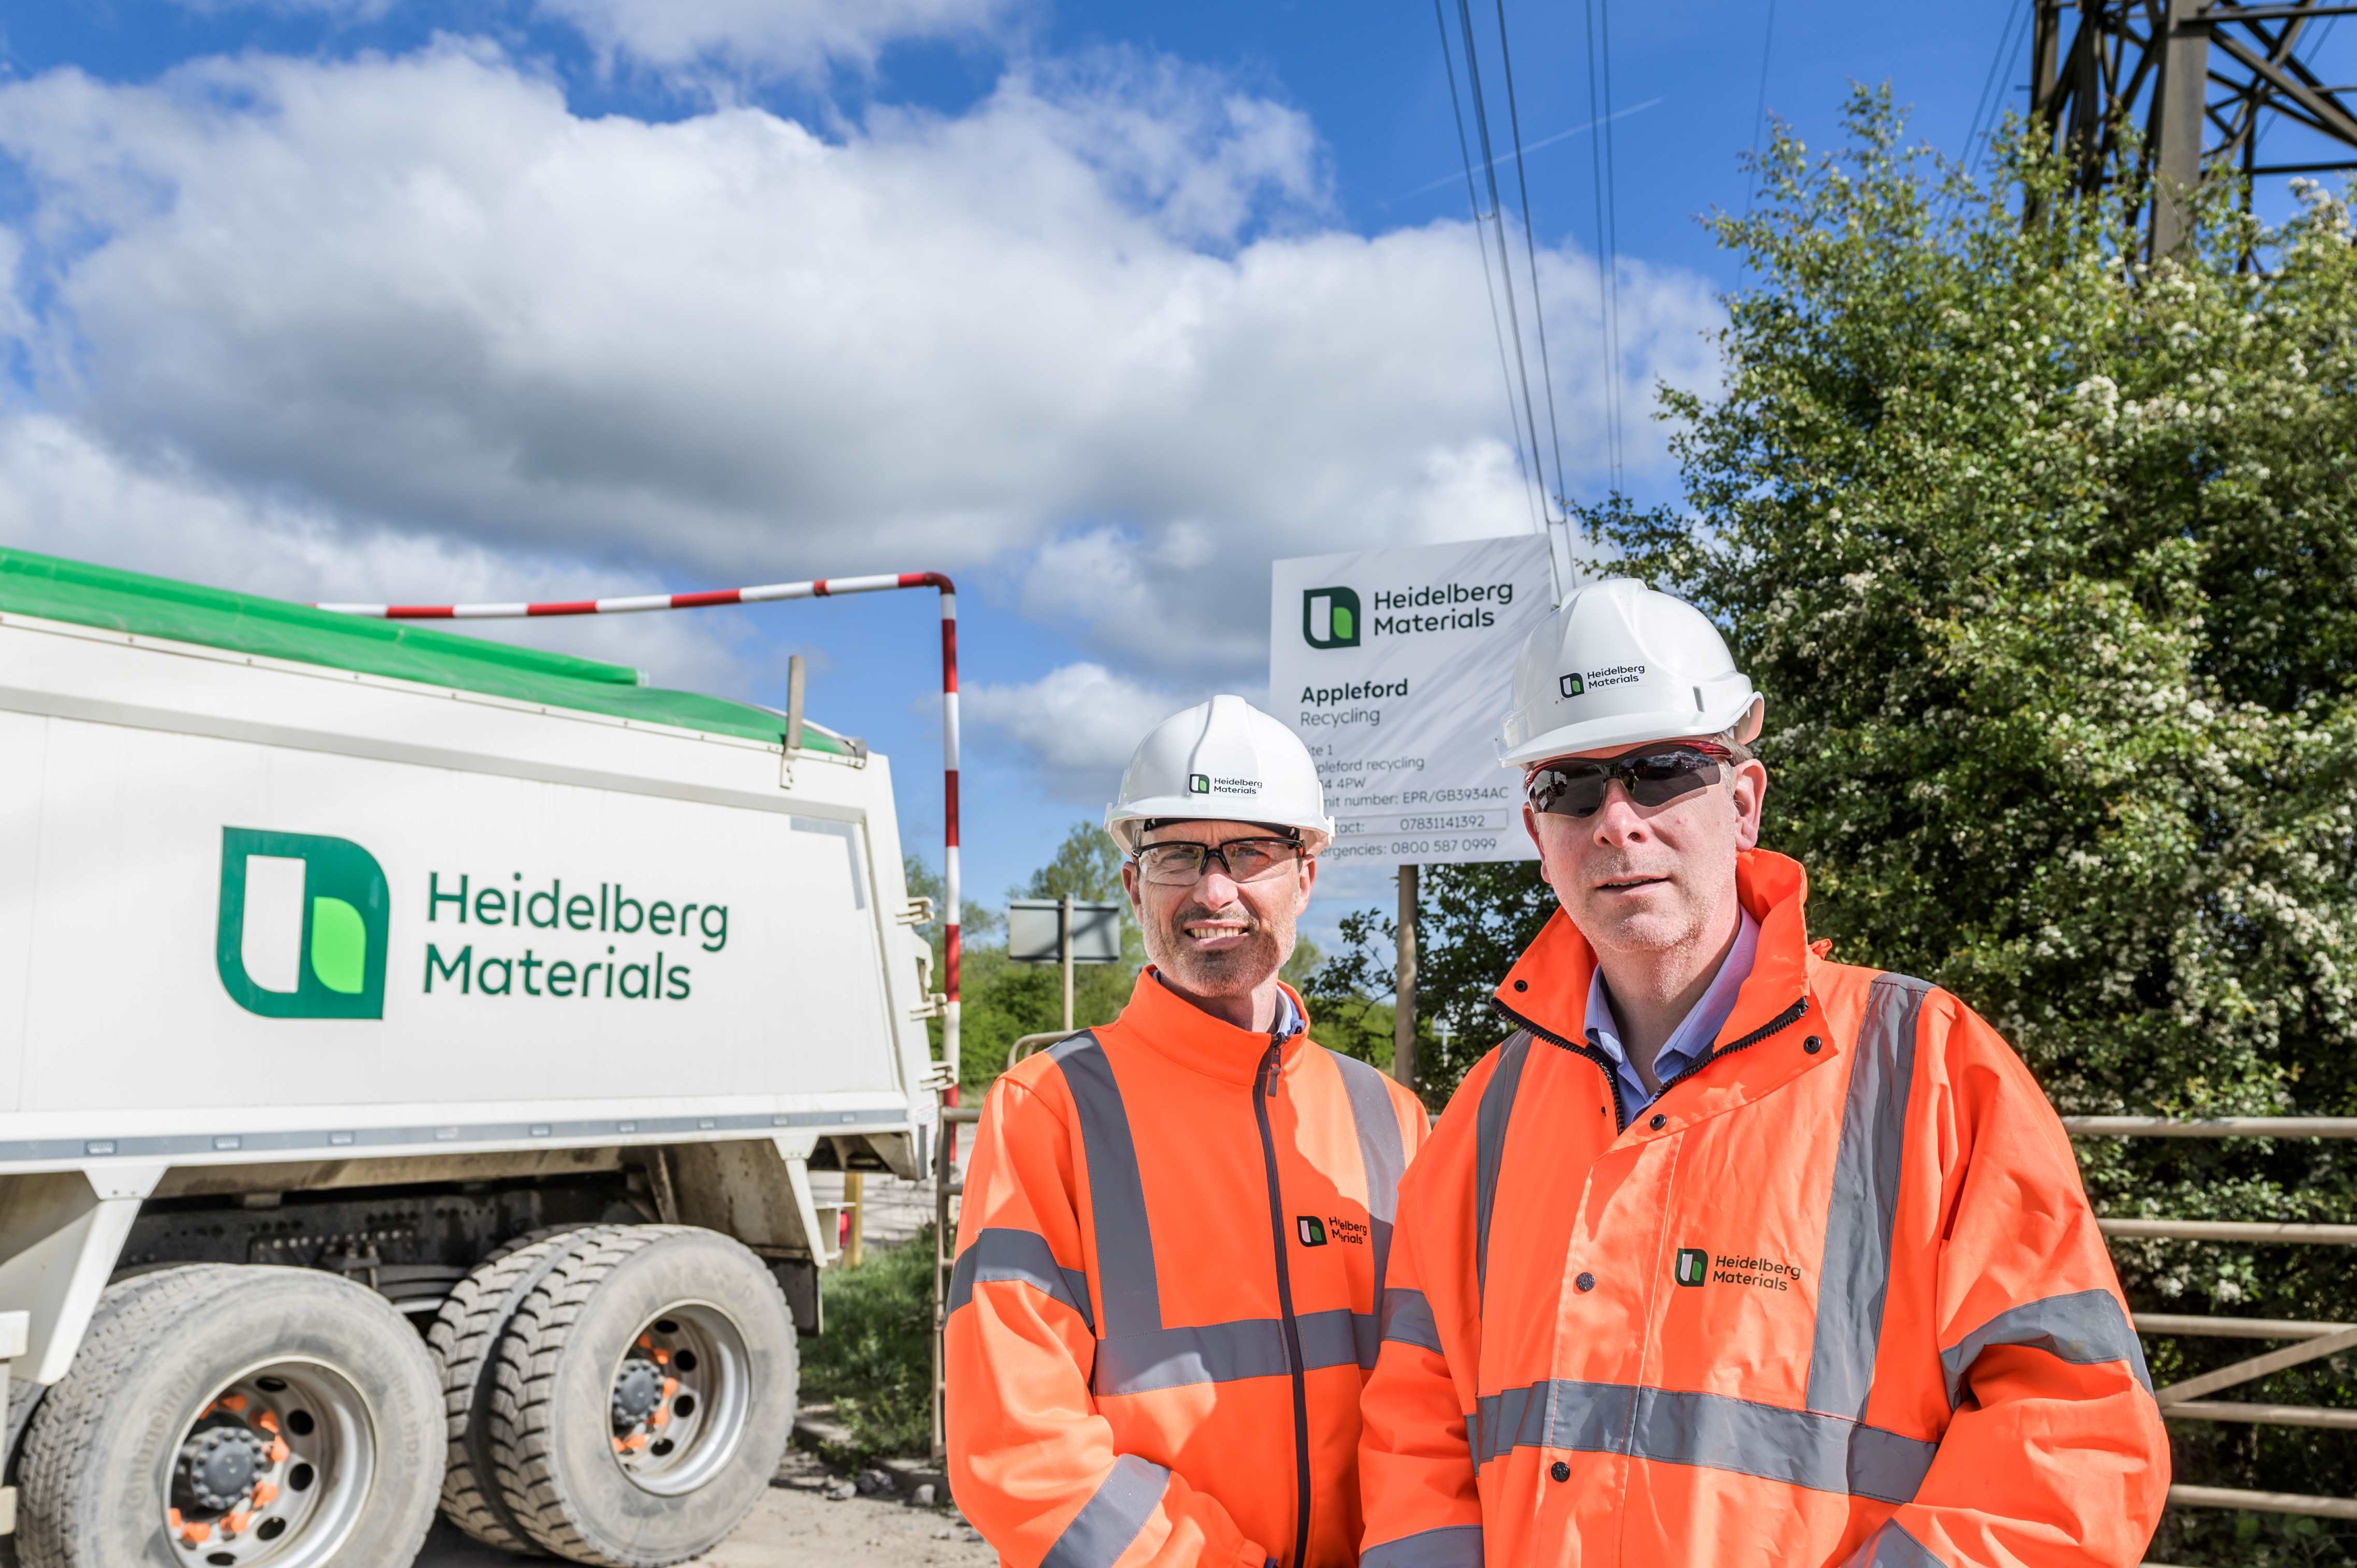 James Whitelaw (right), Heidelberg Materials recycling MD, and Richard Wilcock, recycling director, at the Appleford site